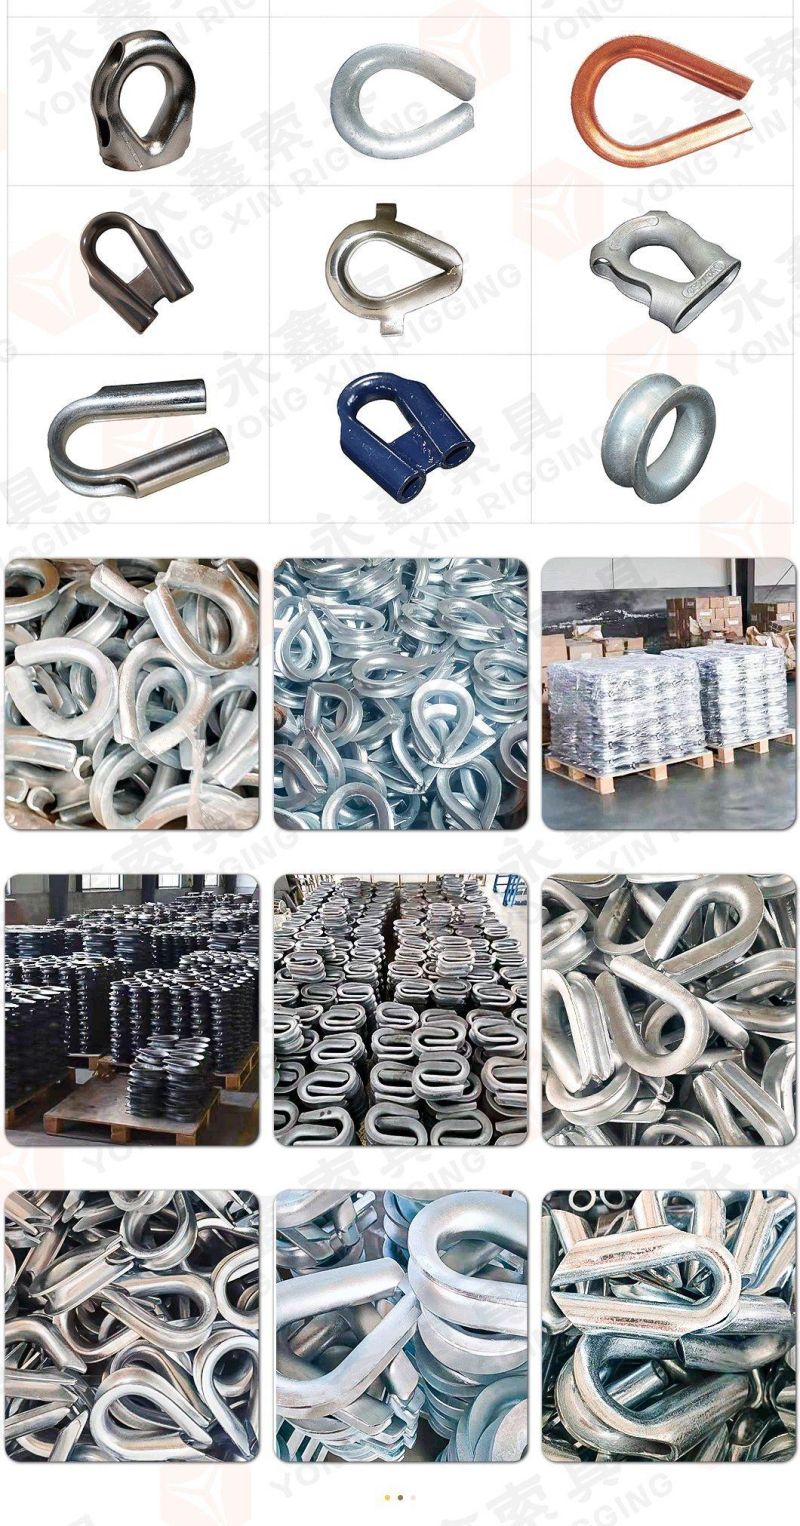 Thimble Thimble Manufacturer Hot DIP Galvanized Us Type Heavy Duty G-414 Wire Rope Thimble